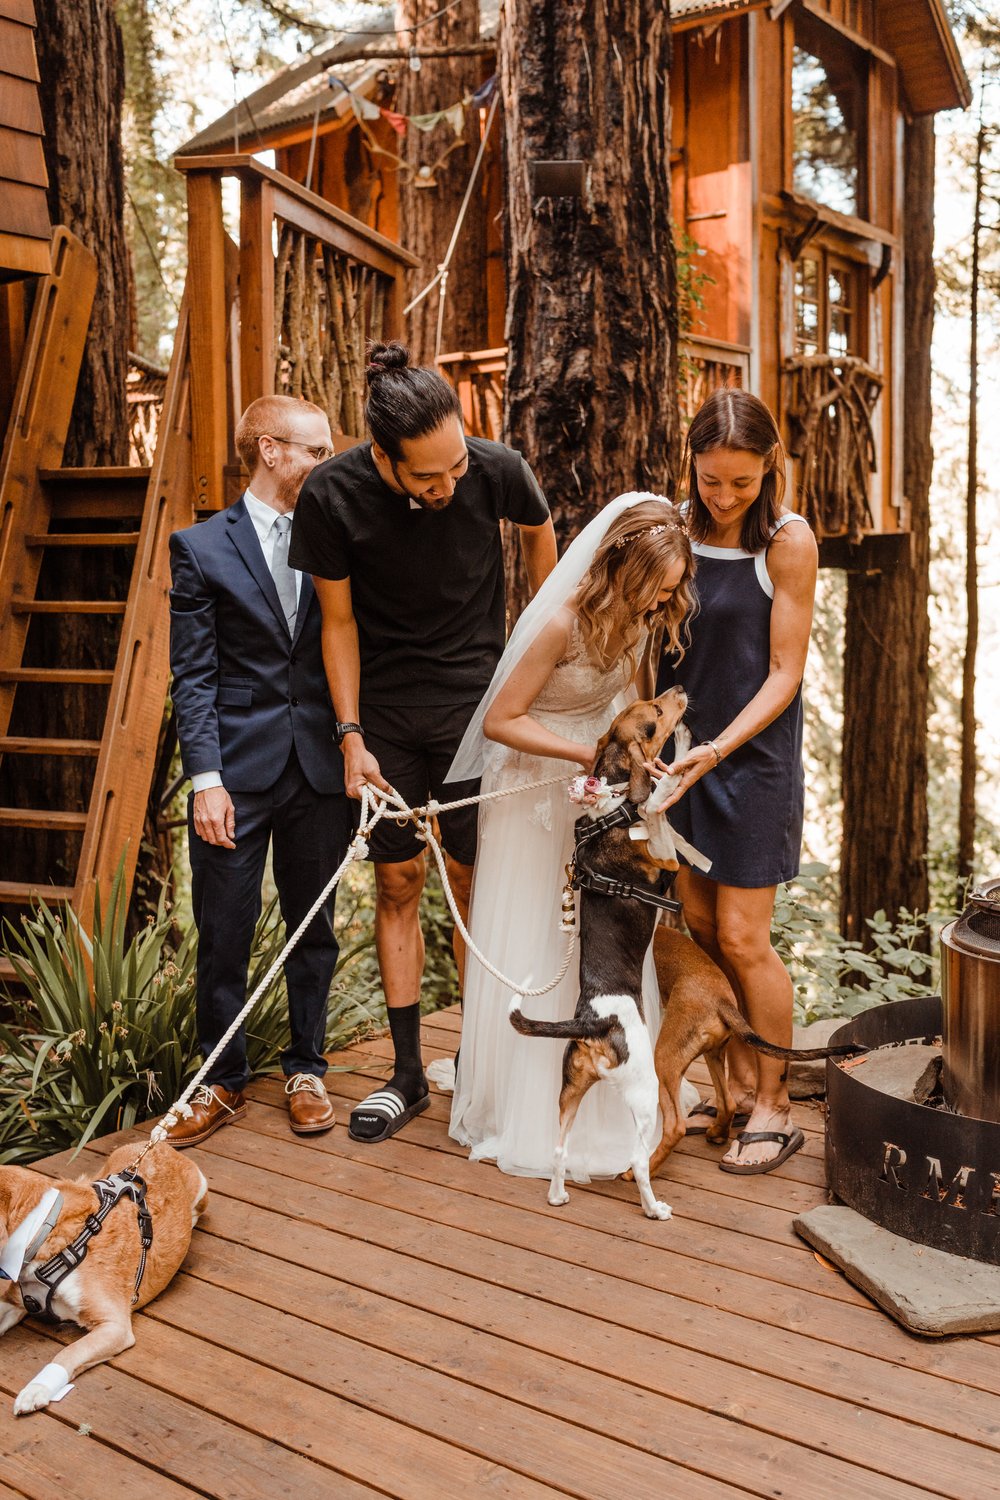 Wedding-in-the-Woods-Bride-and-Groom-with-Best-Friends-and-Dogs (1).jpg